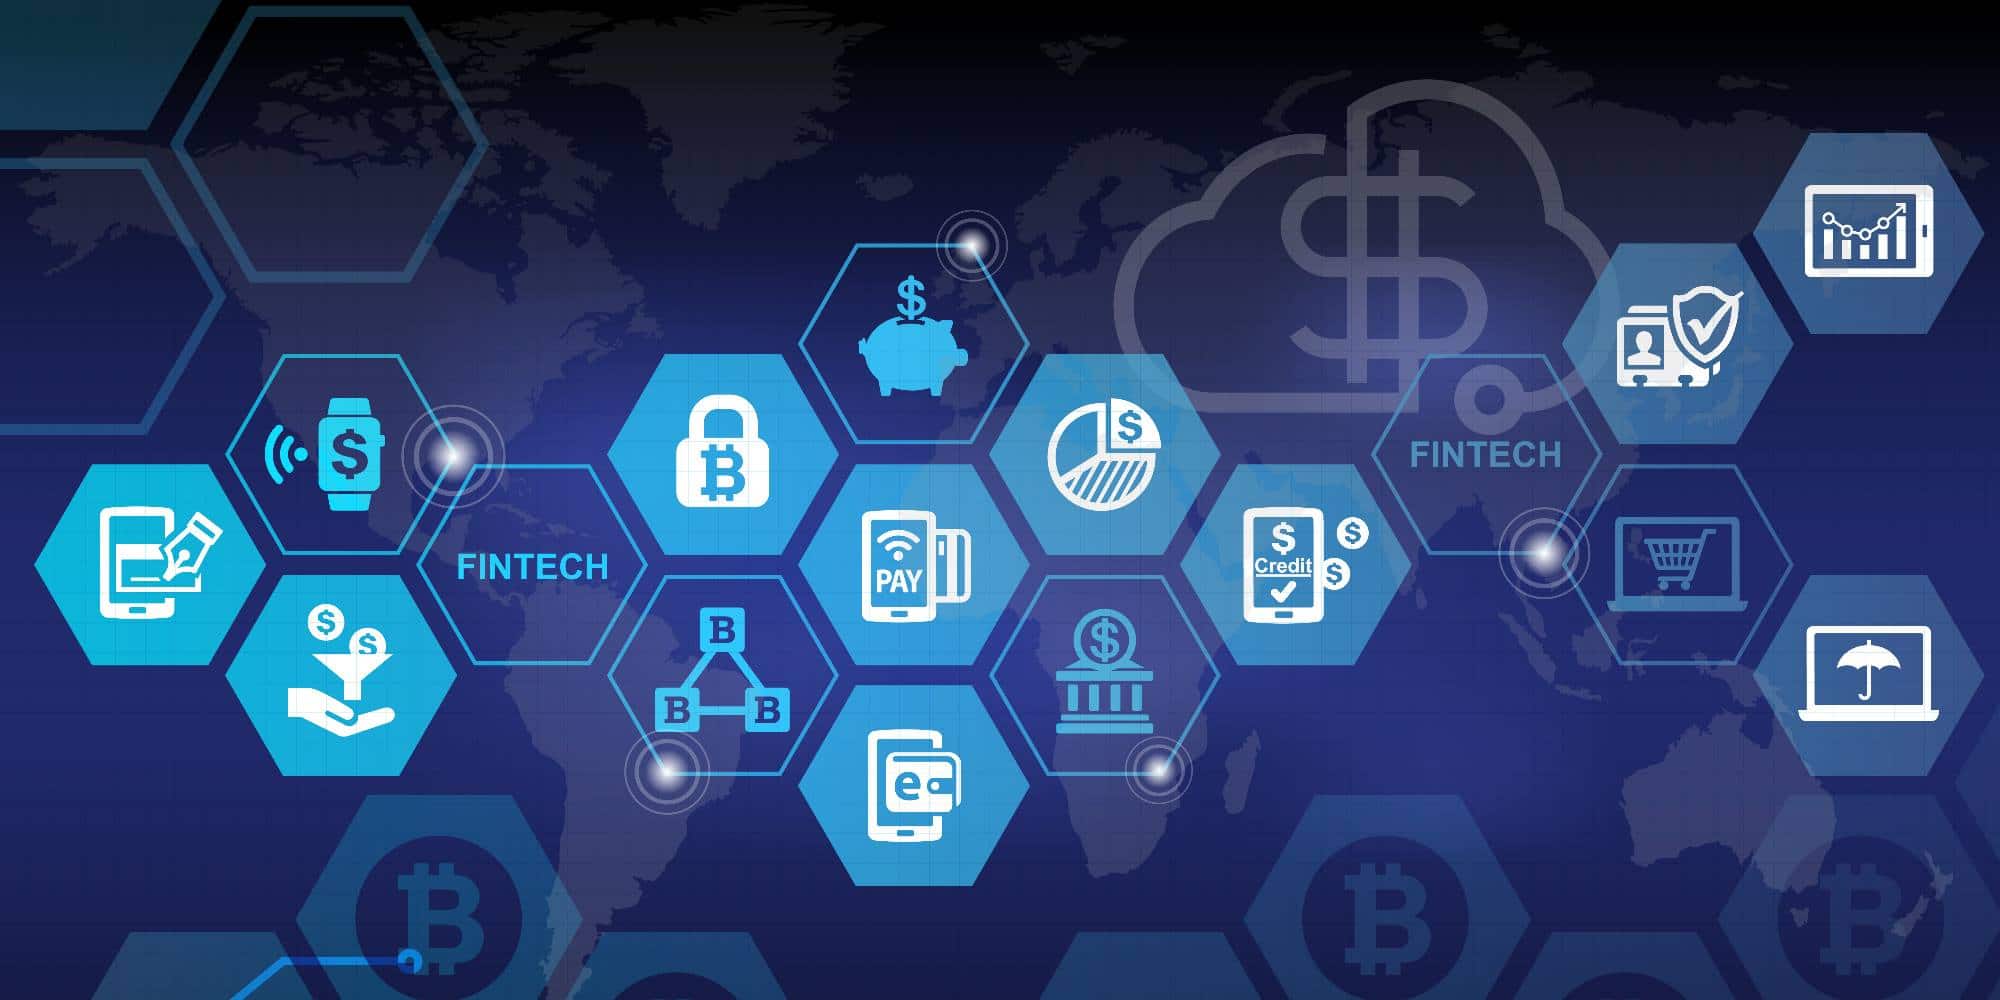 A graphic displaying elements of fintech, blockchain, and smart contracts